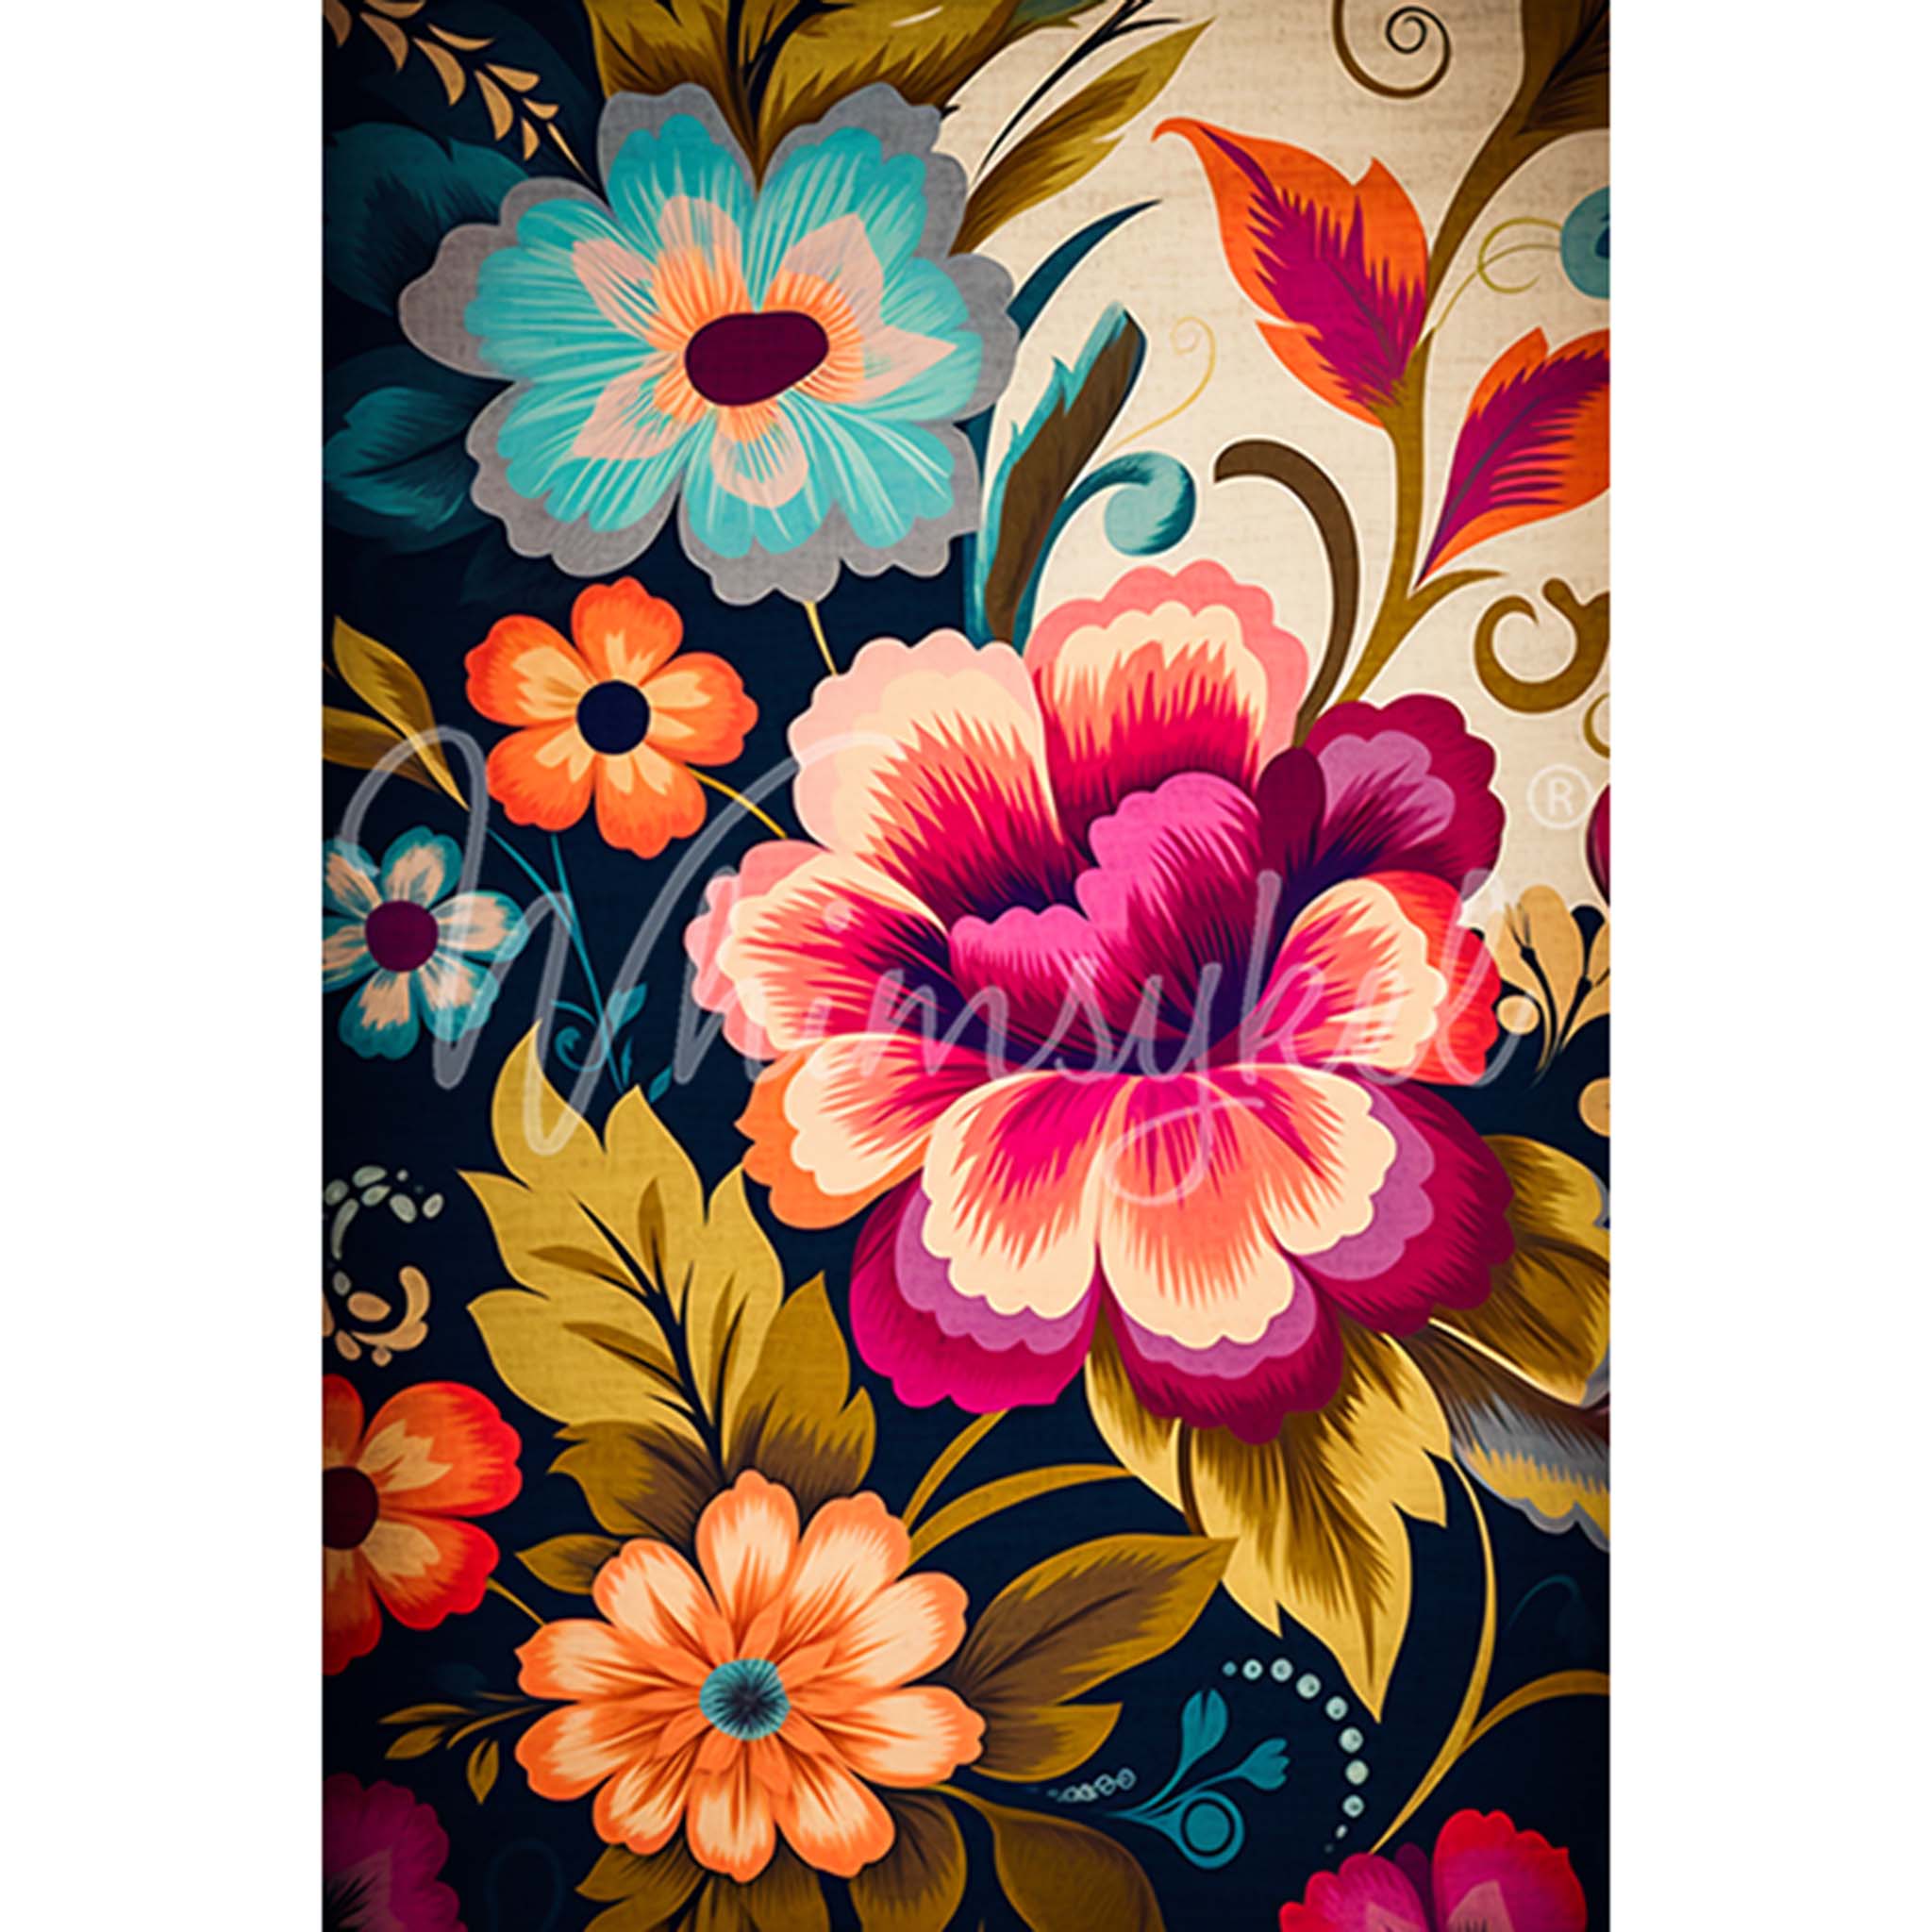 Tissue paper design that features a deep blue and cream colored background with an array of bright colorful flowers. White borders are on the sides.